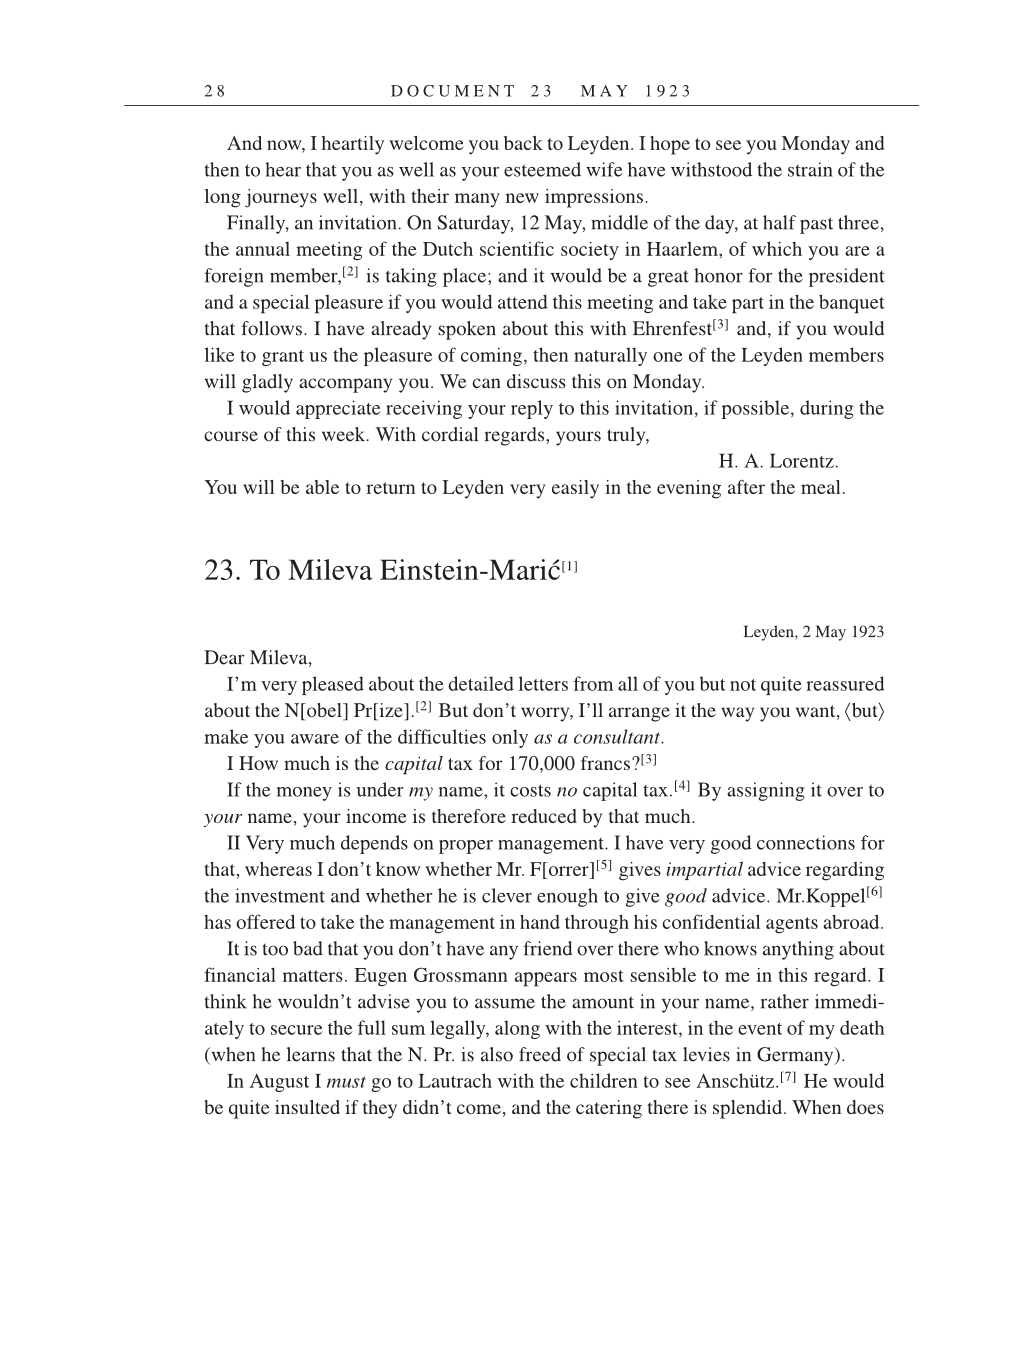 Volume 14: The Berlin Years: Writings & Correspondence, April 1923-May 1925 (English Translation Supplement) page 28